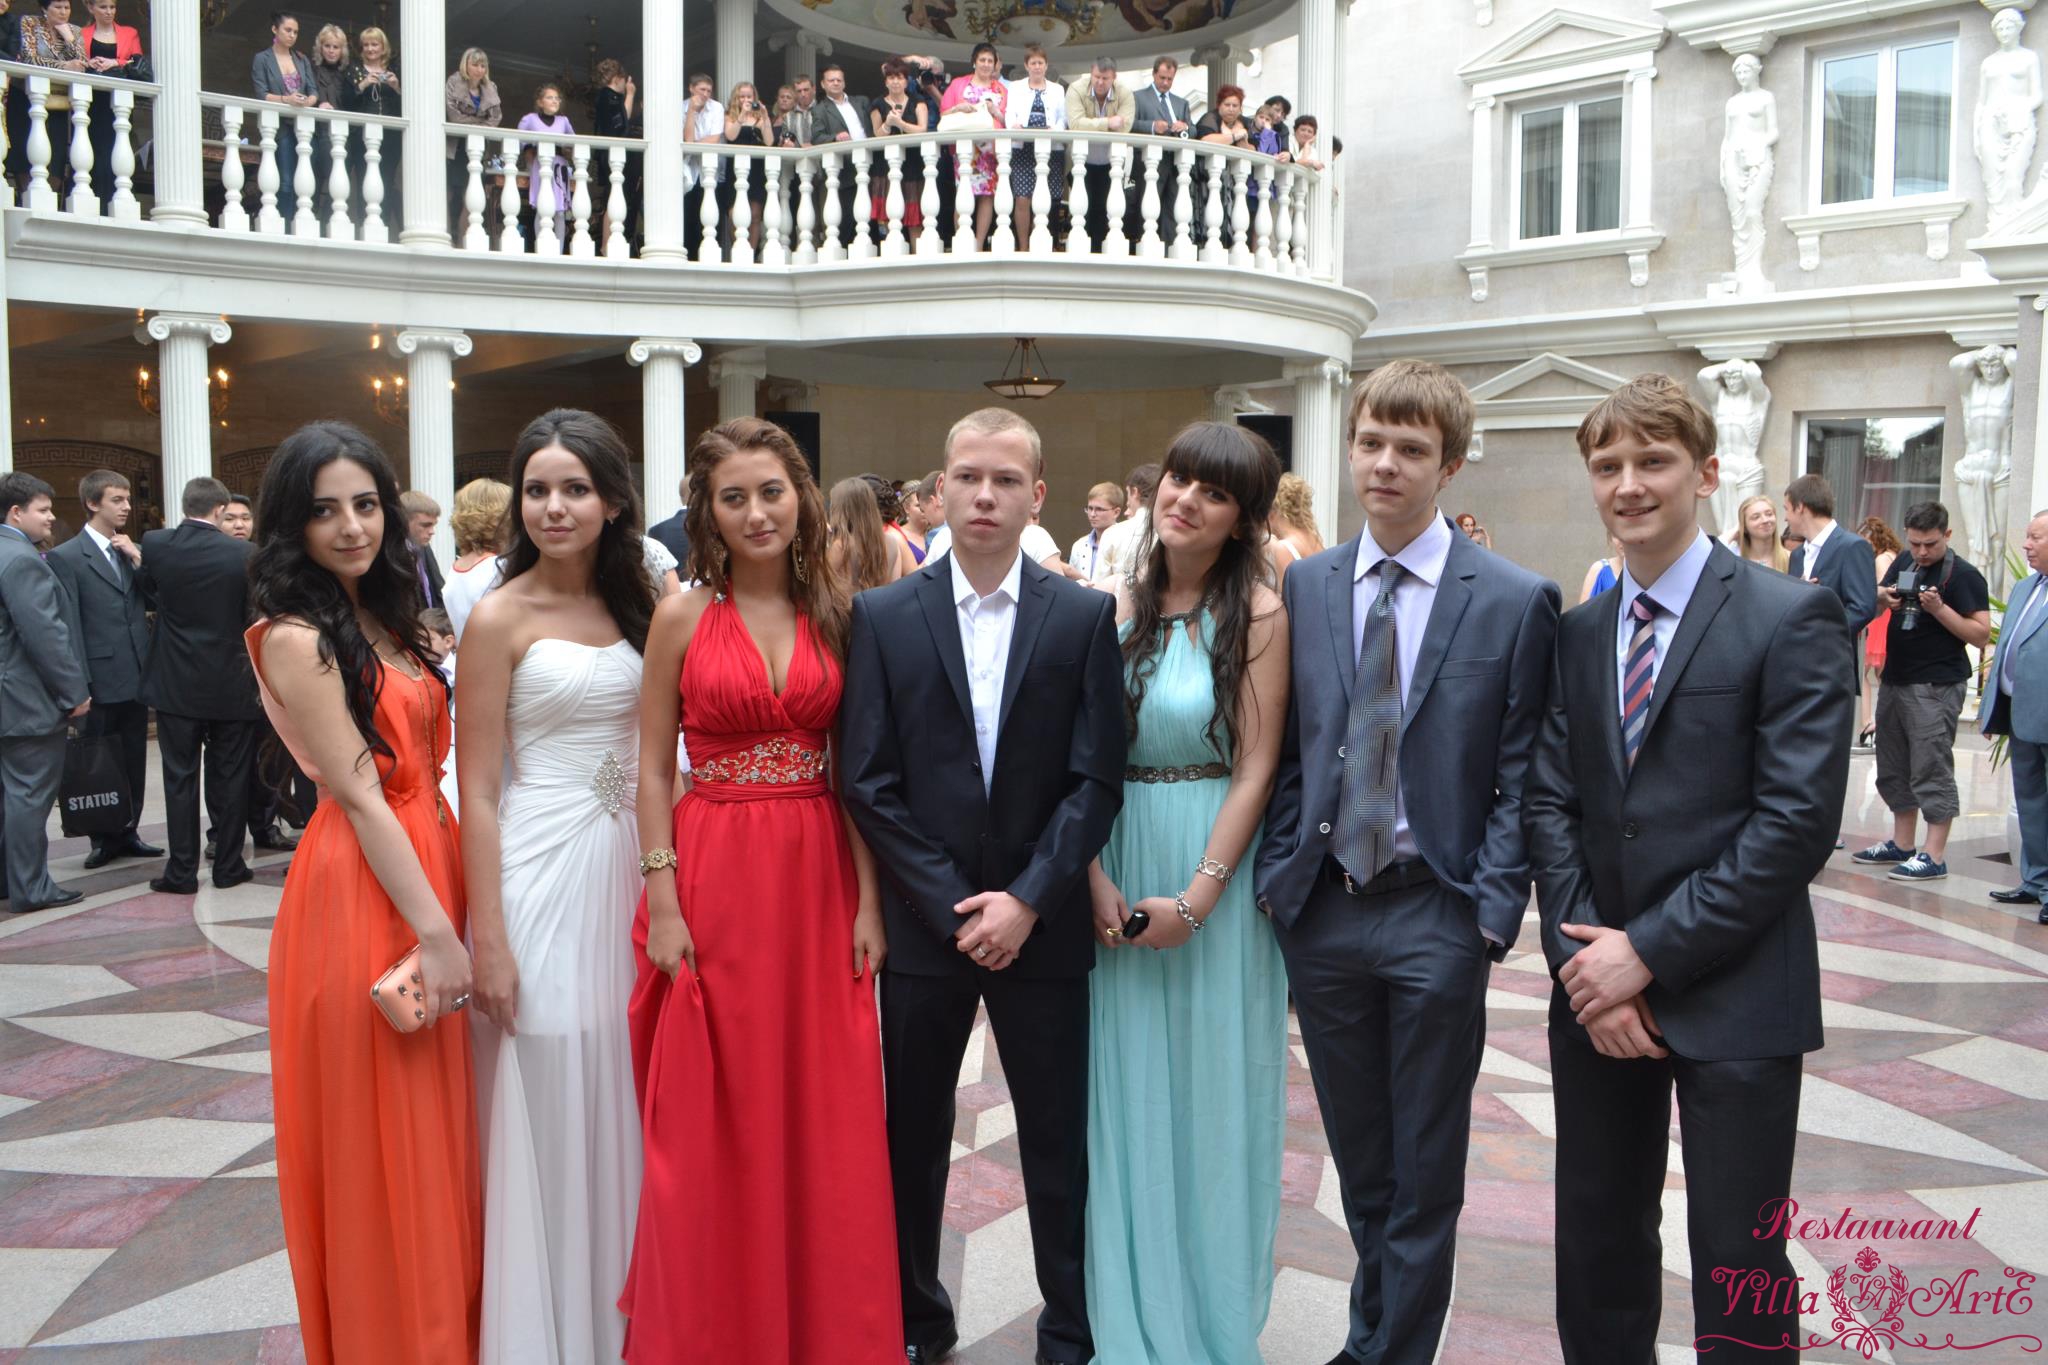 Prom on the summer terrace of the Villa ArtE